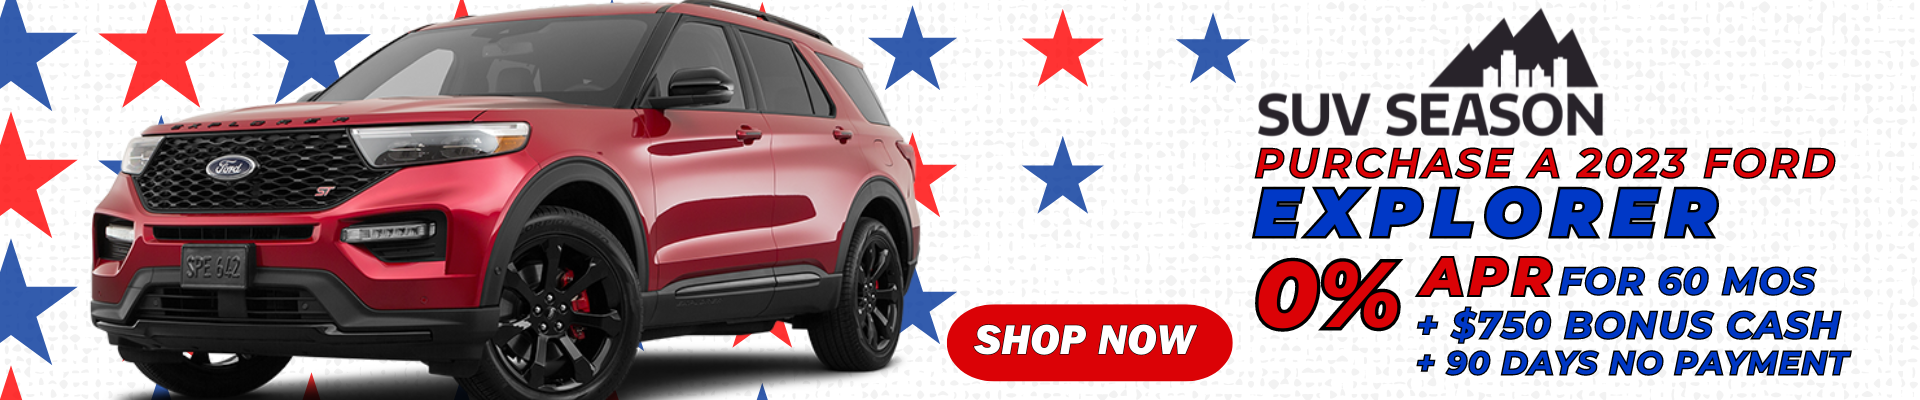 Red Ford Explorer on white background with red and blue star